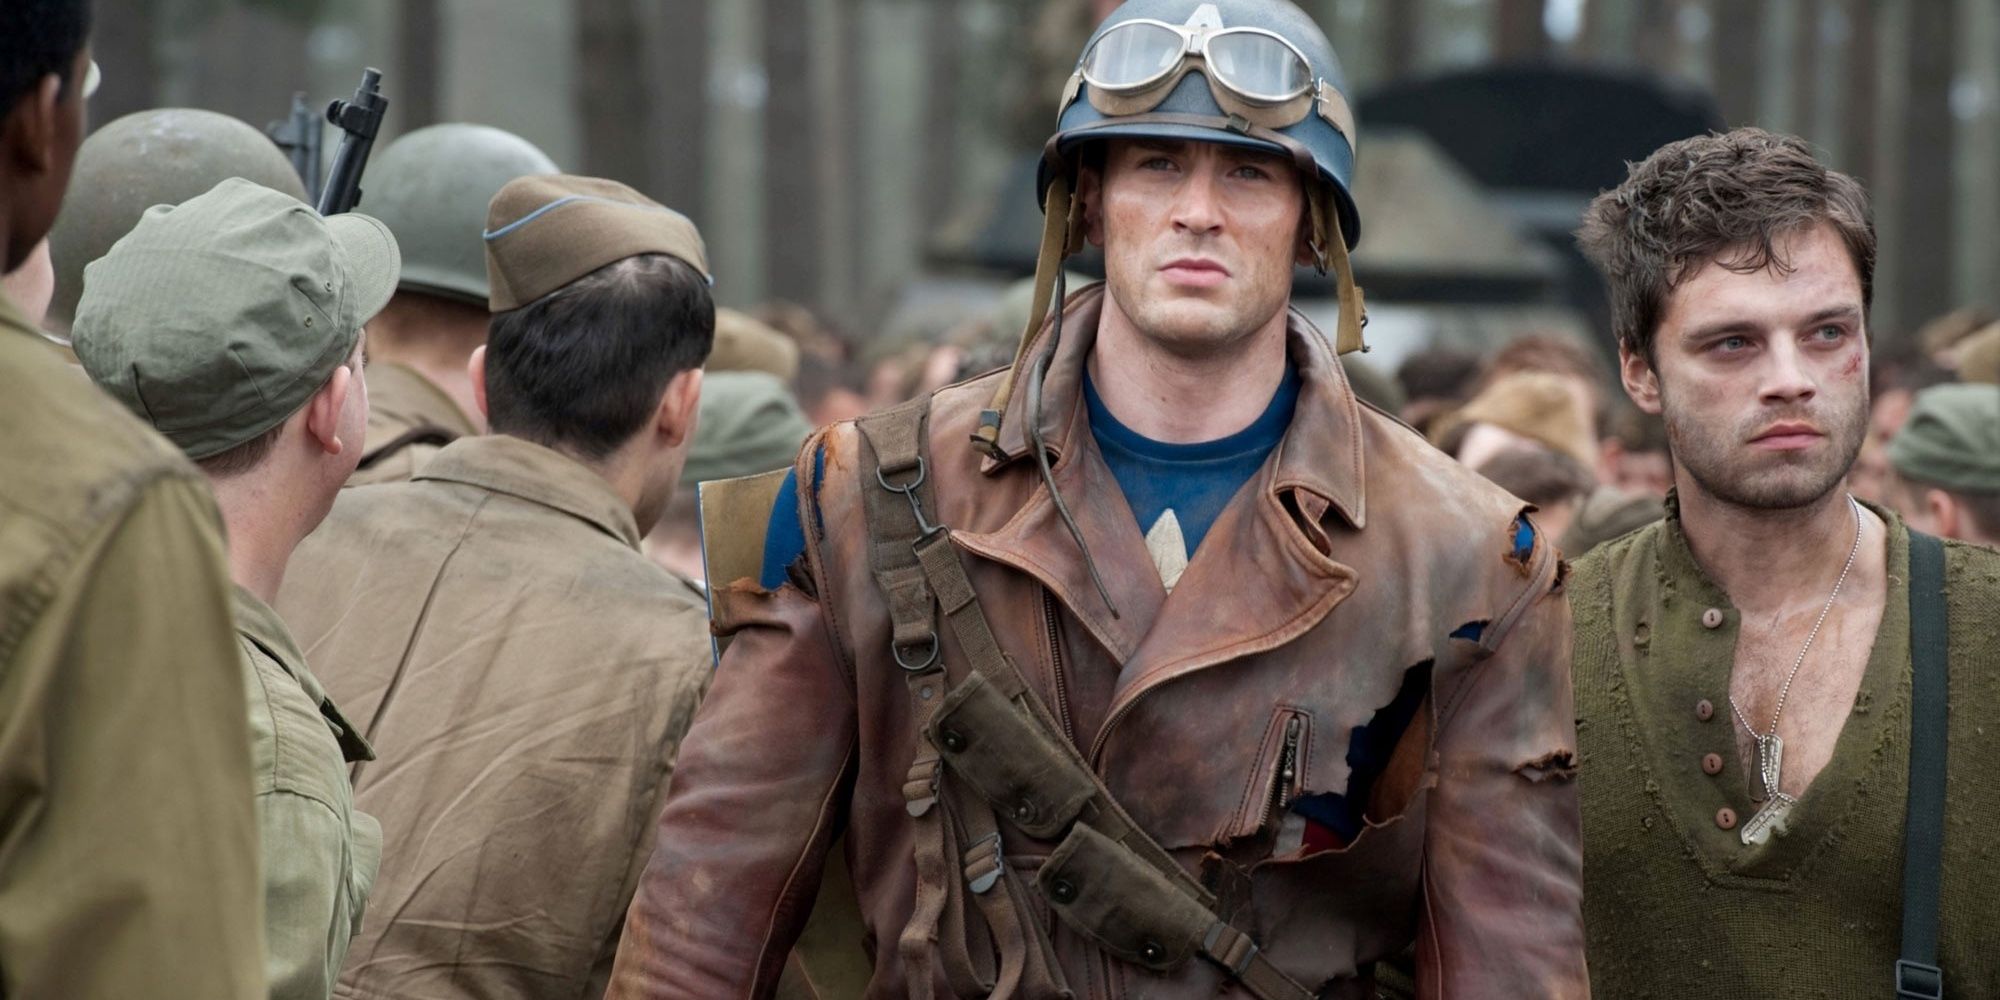 Steve Rogers and Bucky Barnes return to army base in Captain America The First Avenger